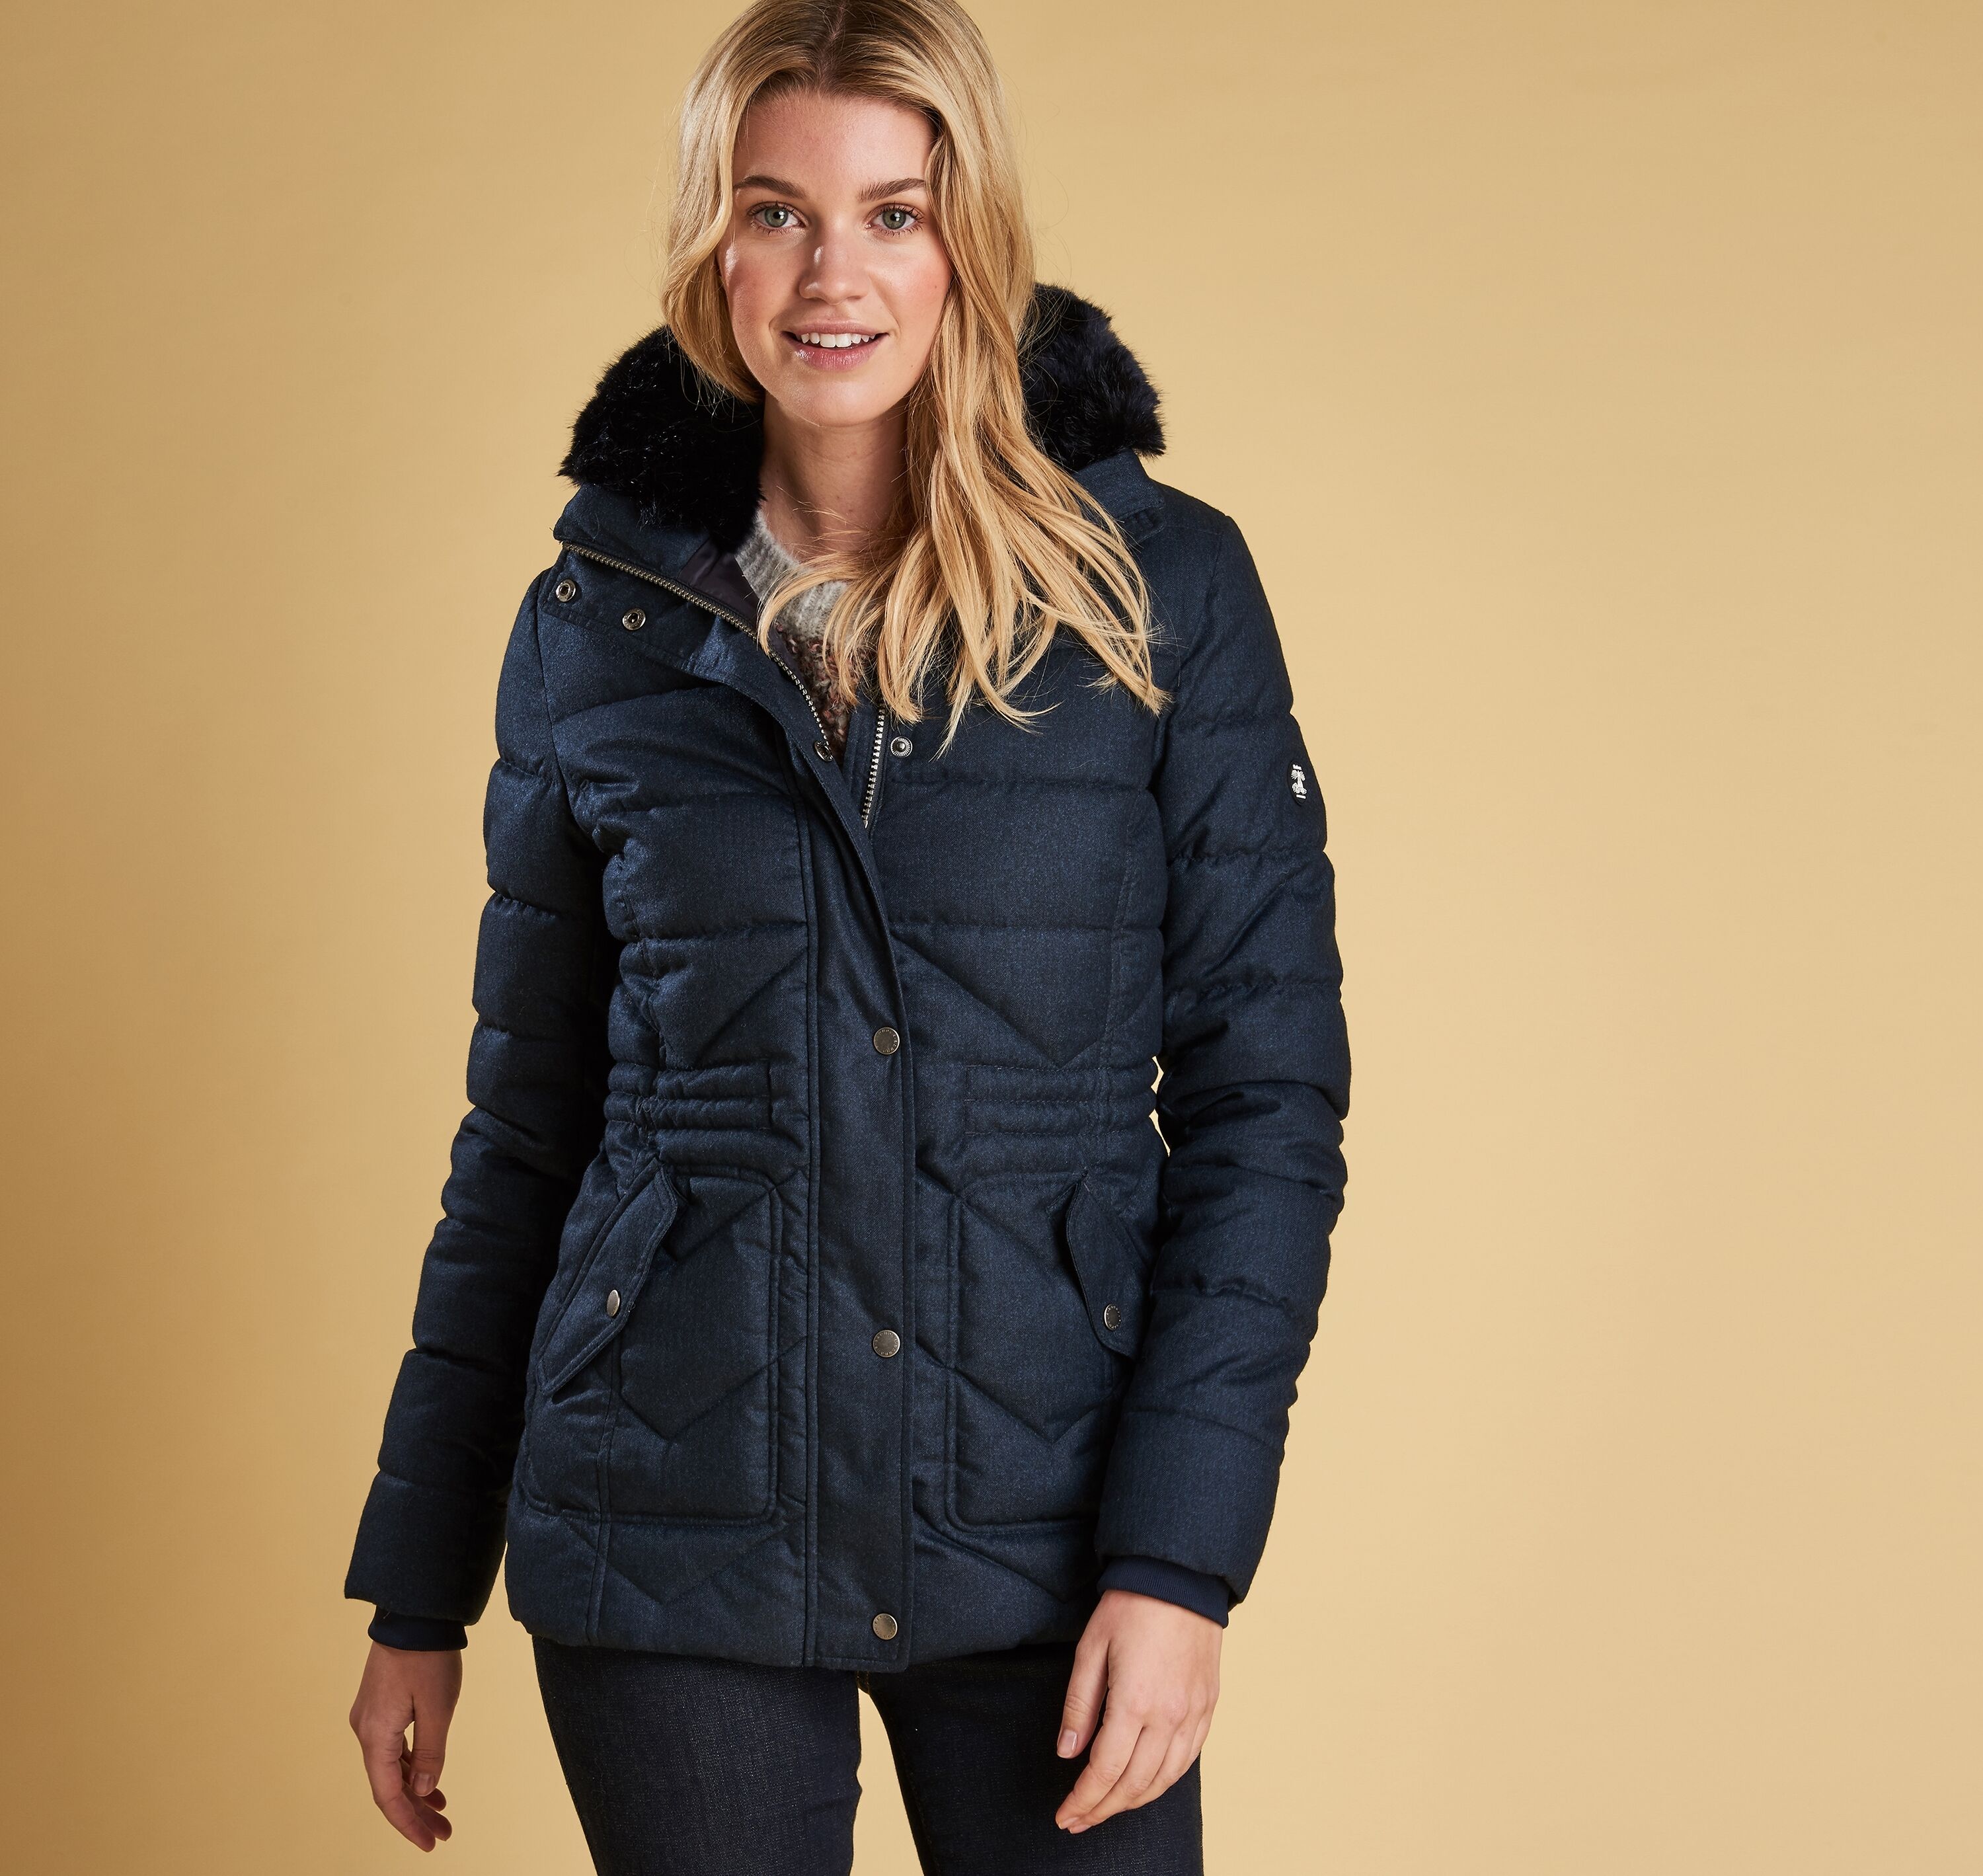 barbour navy quilted jacket